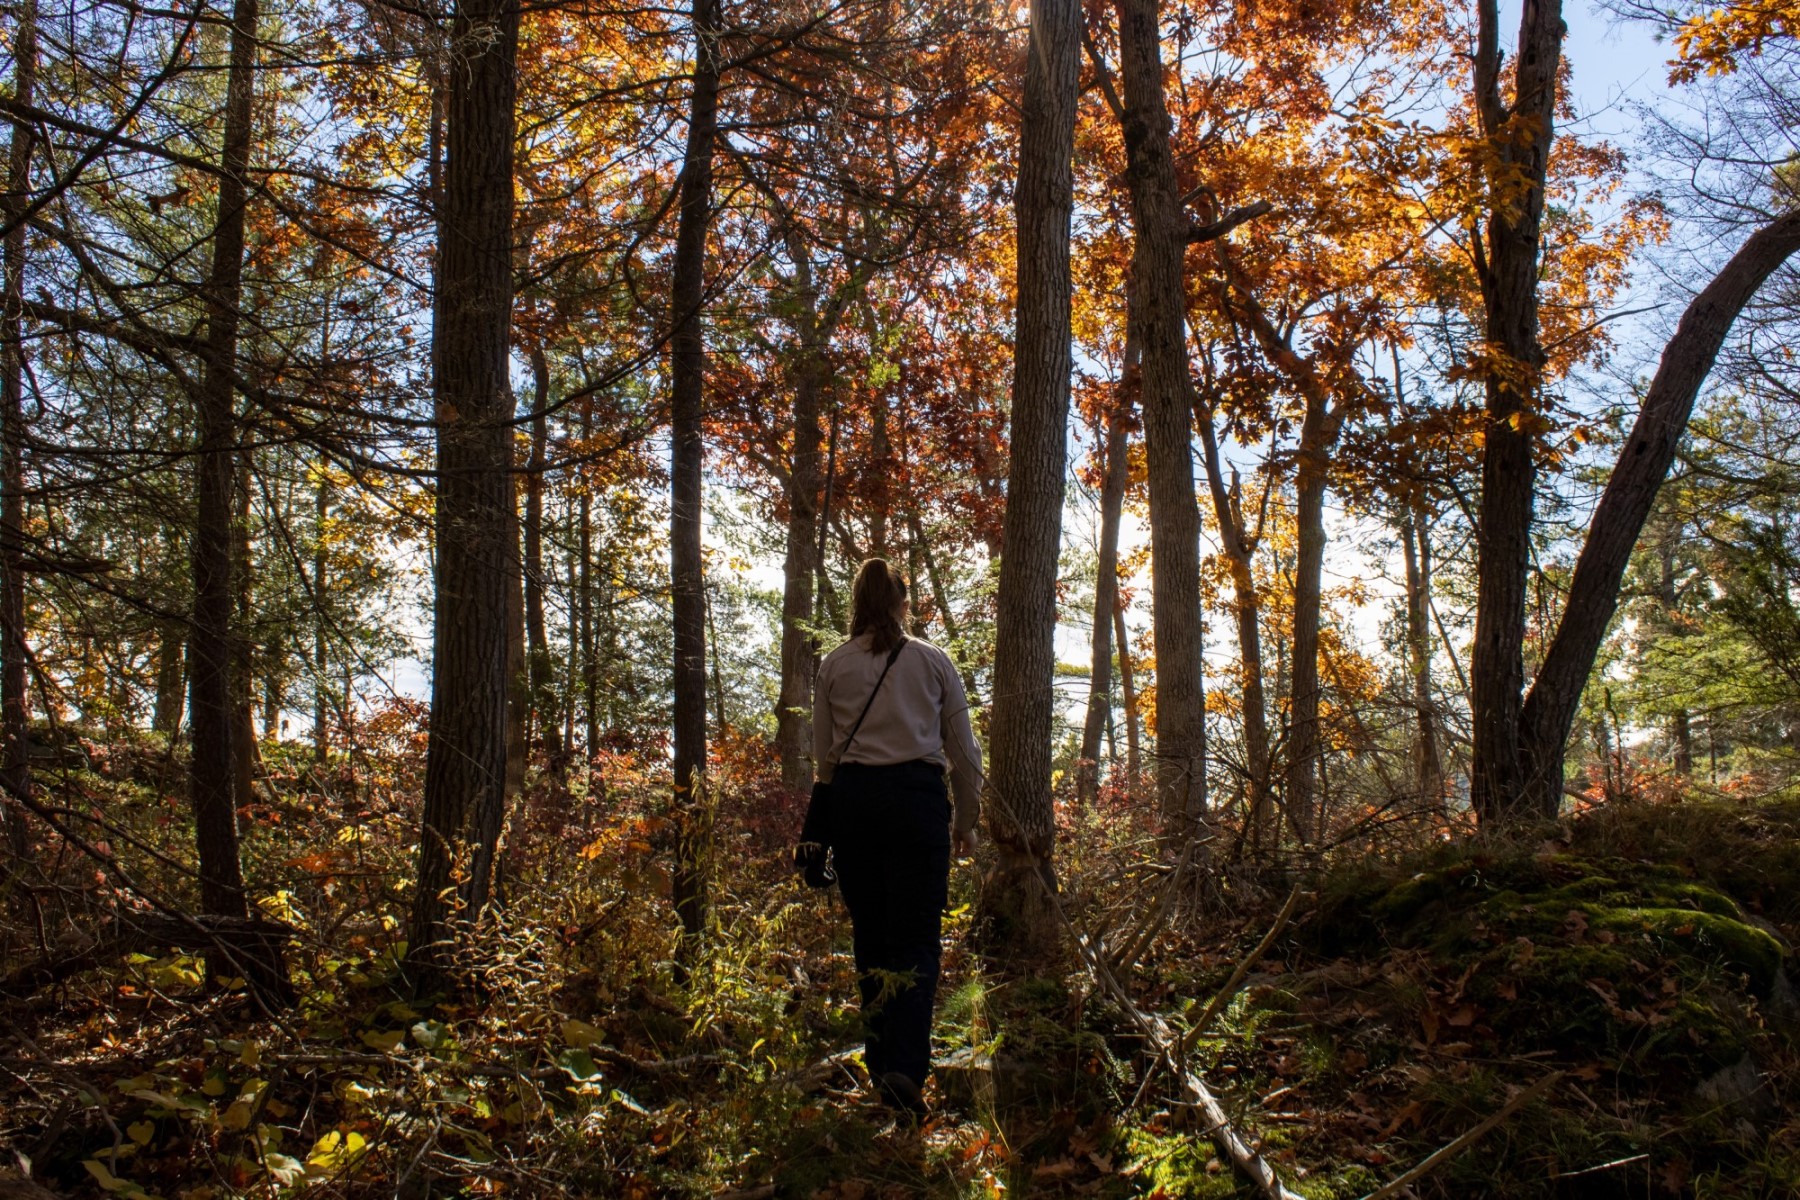 An Ontario Parks staff person walking away from the camera into a fall-coloured forest, surrounded by towering trees